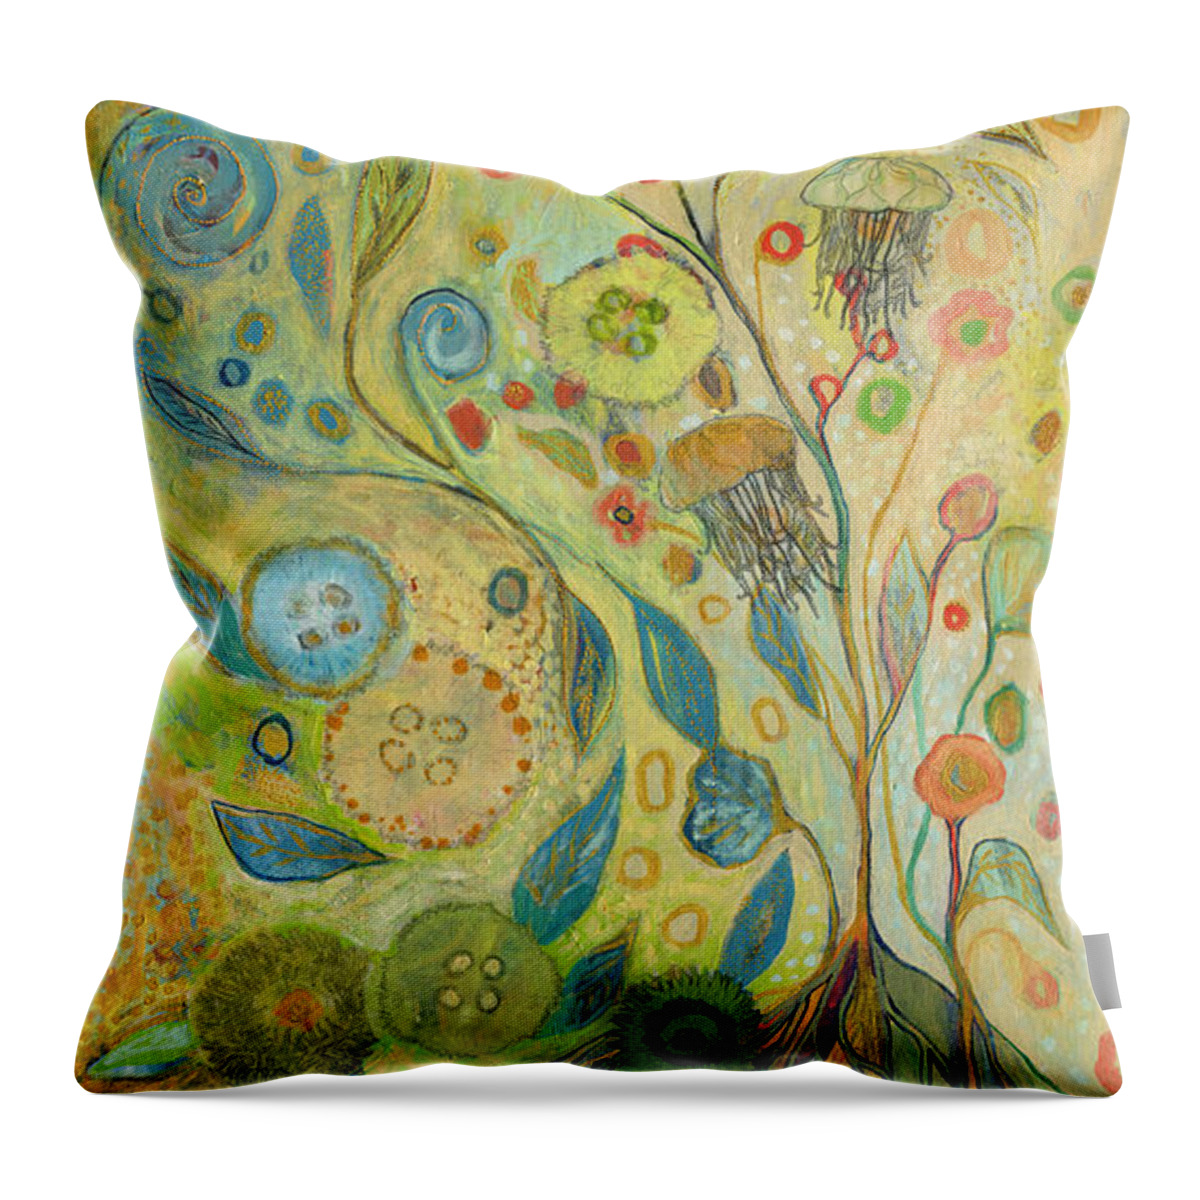 Underwater Throw Pillow featuring the painting Embracing the Journey by Jennifer Lommers